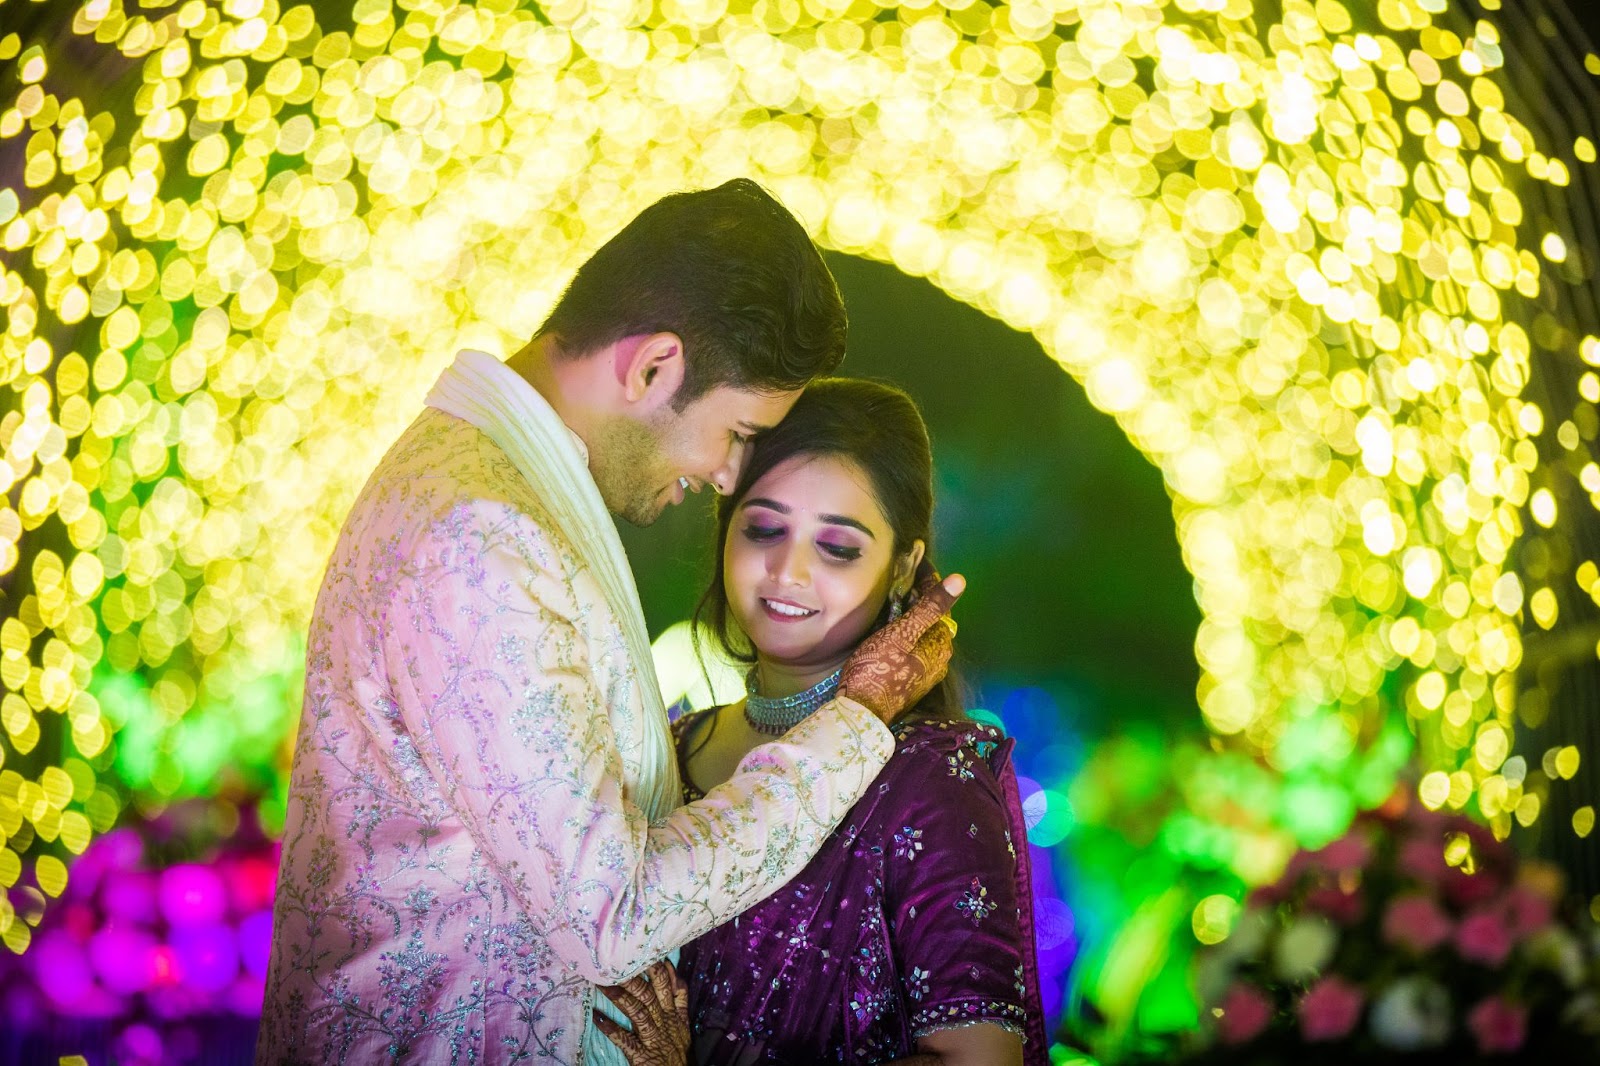 Quality wedding photographer Indore delivering stunning results - Harsh Studio Photography 